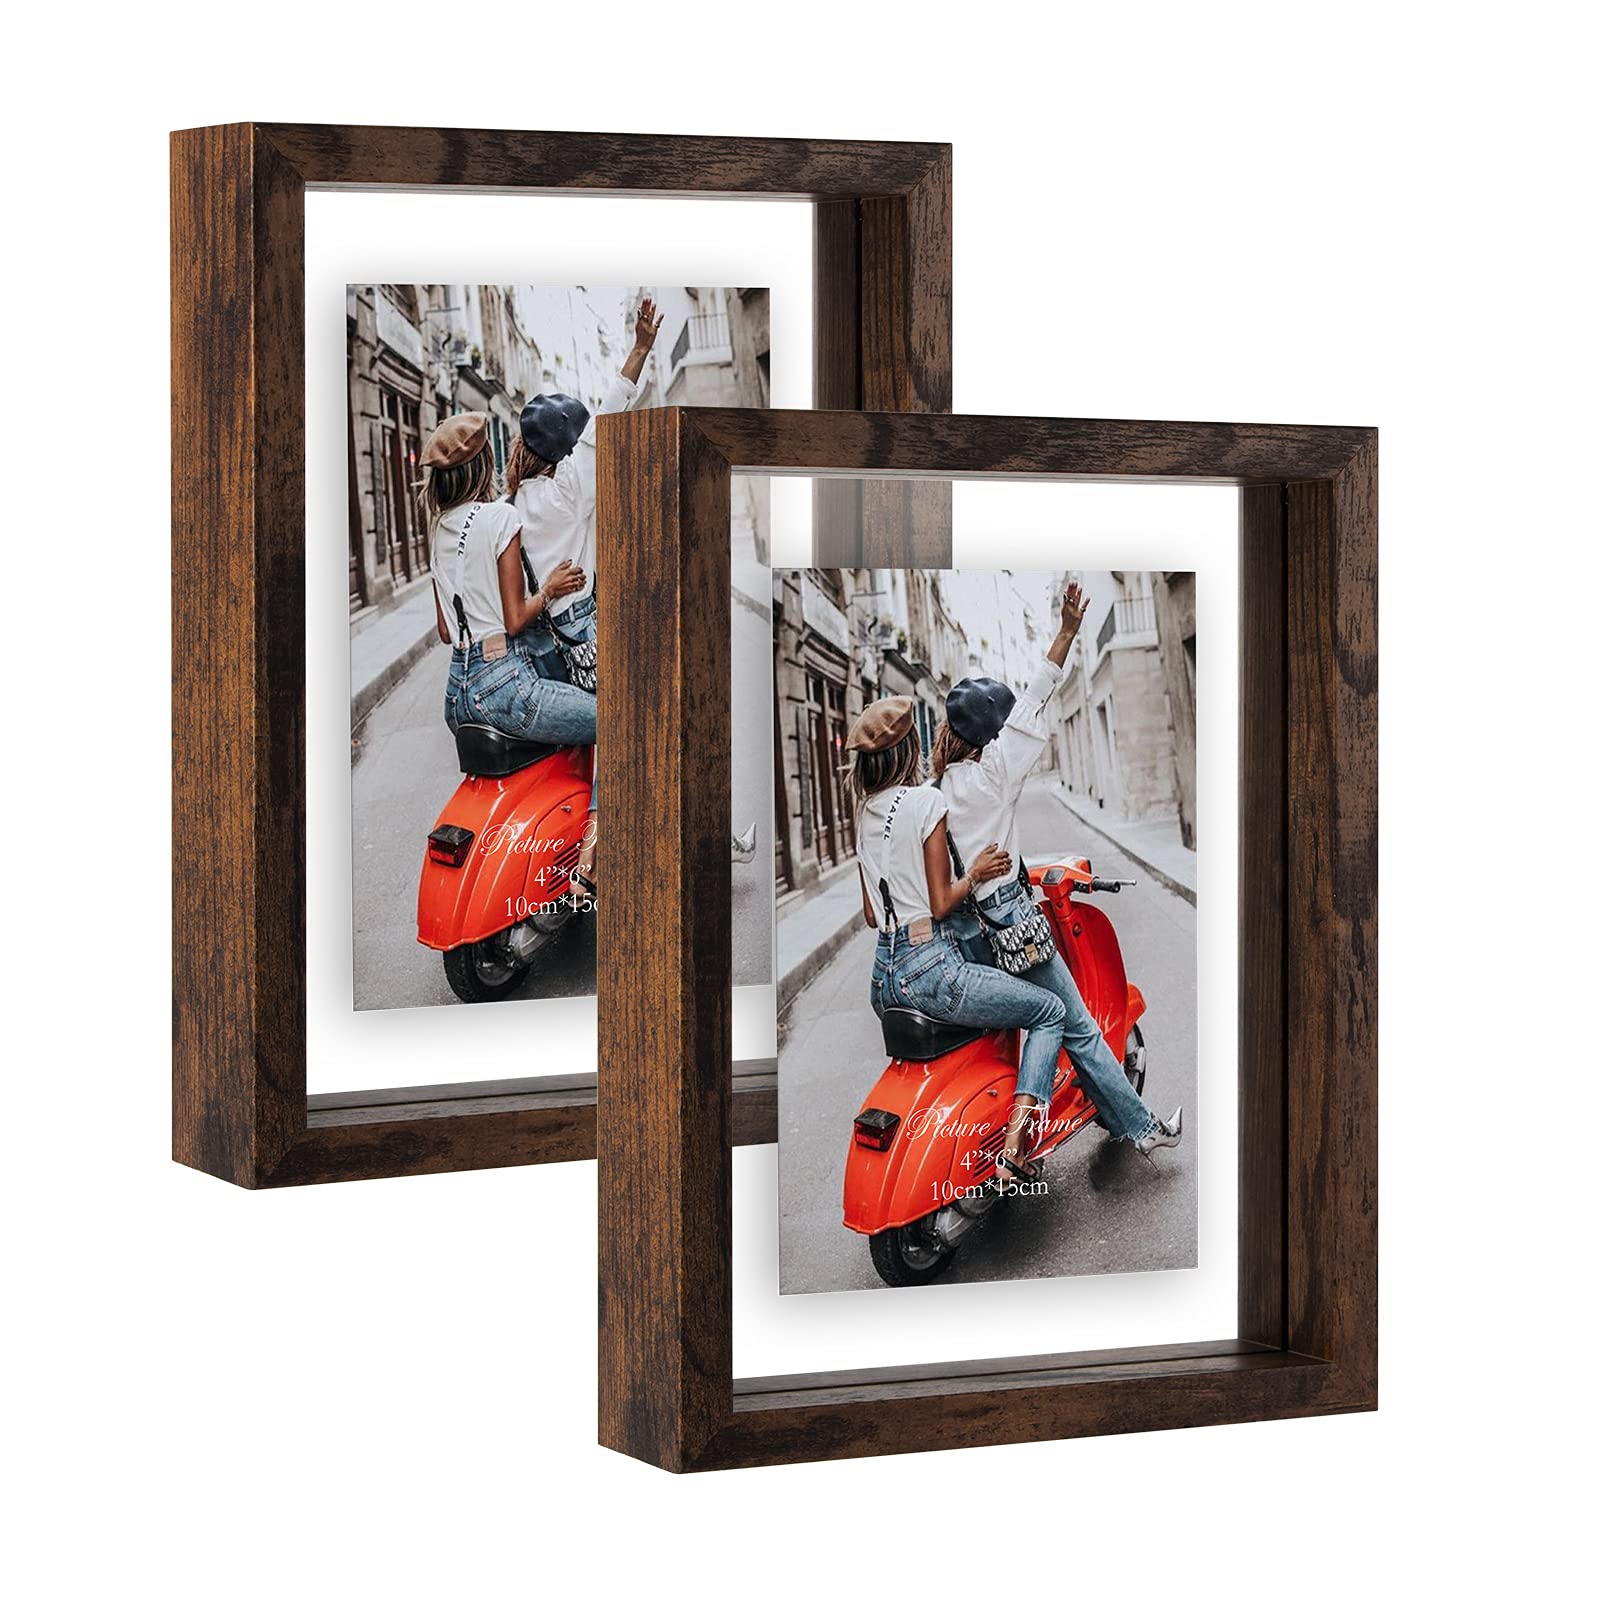 WIFTREY 2 Pack 4x6 Floating Picture Frames, Double Glass Rustic Photo Frame for Wall Hanging or Tabletop Standing, Displays Phot